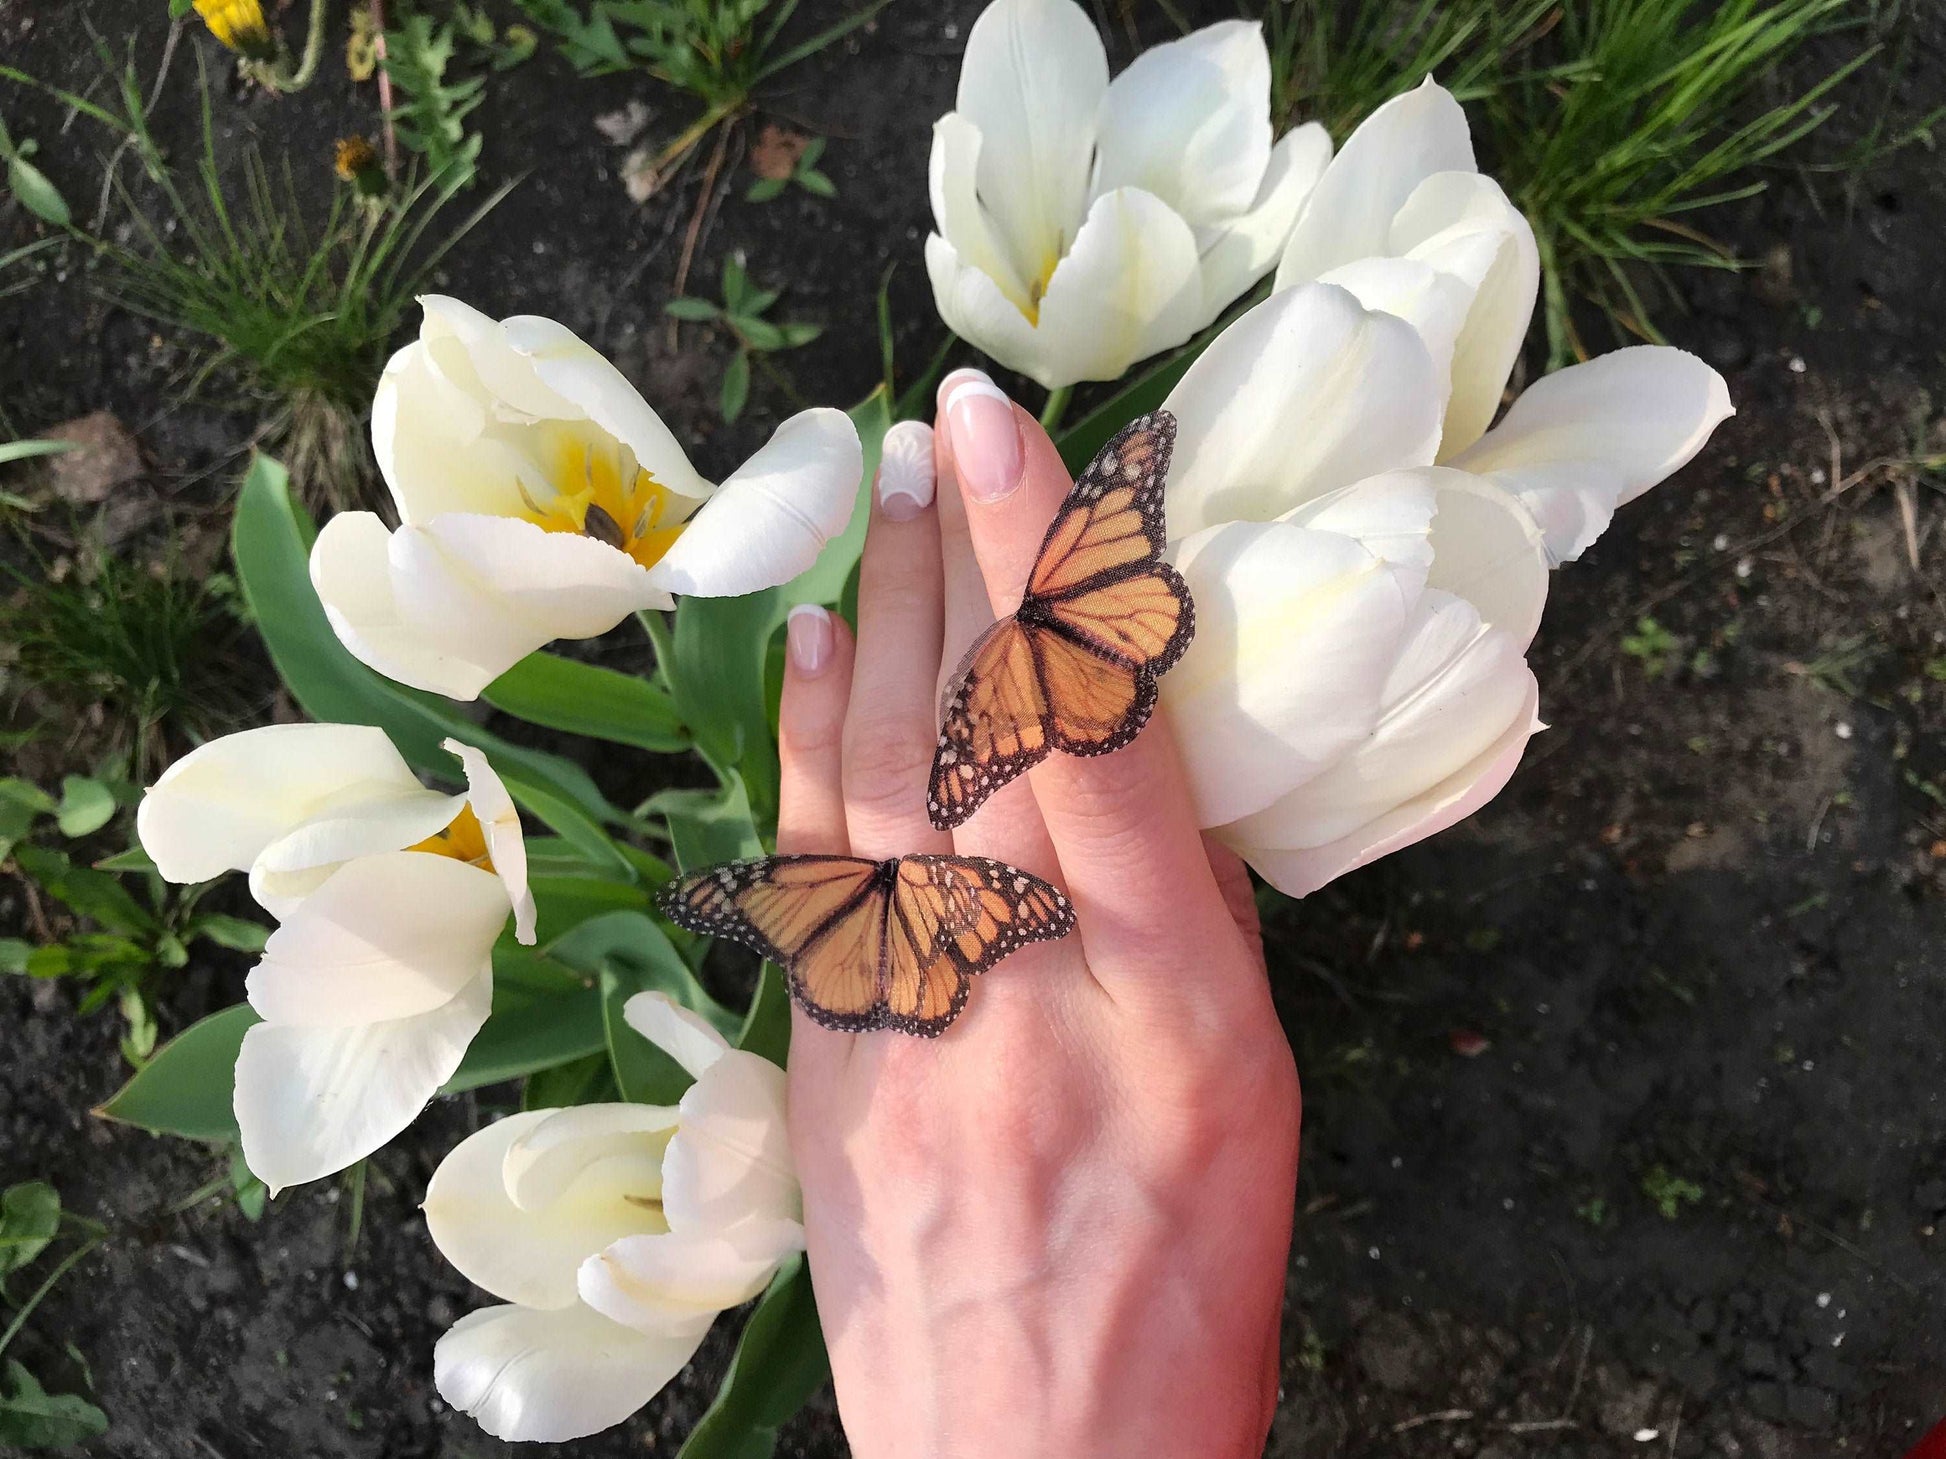 Monarch Butterfly Ring in a Garden Wedding Setting, Elegant and Romantic Jewelry